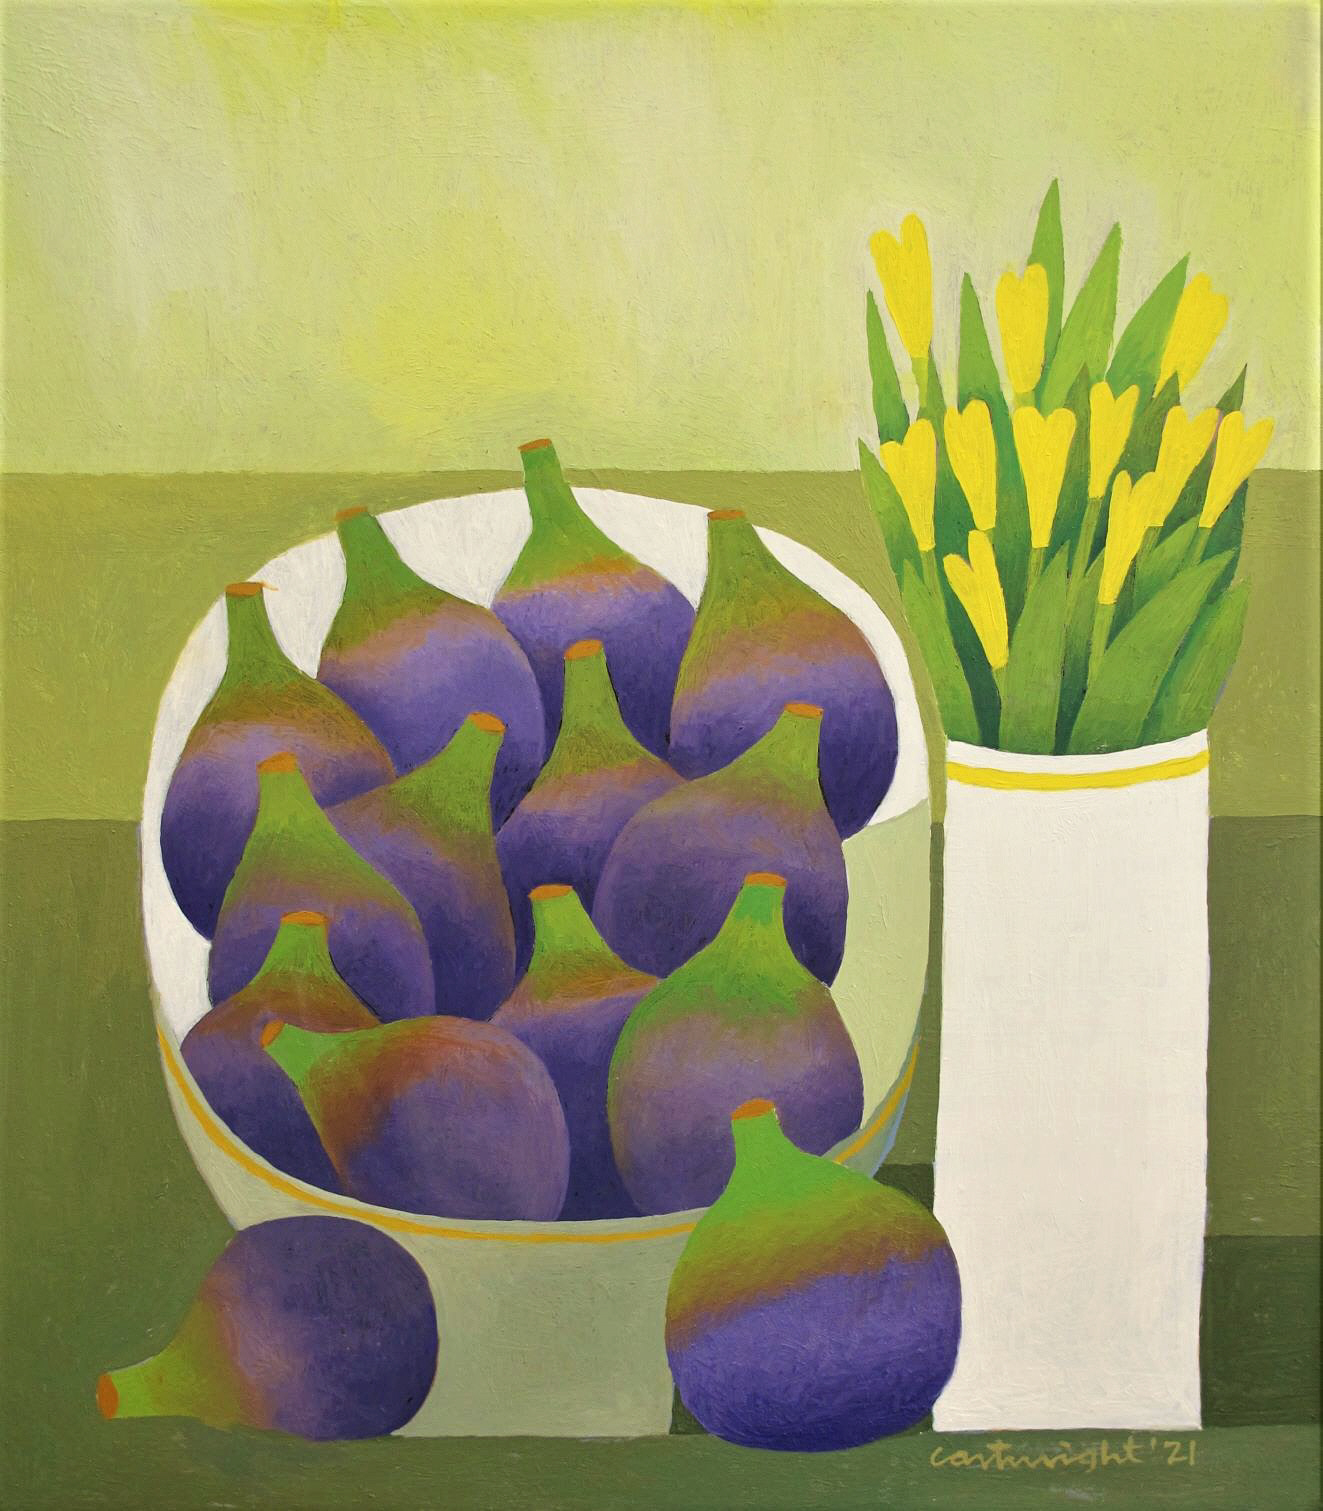 still life with figs and flowers by reg cartwright 2021